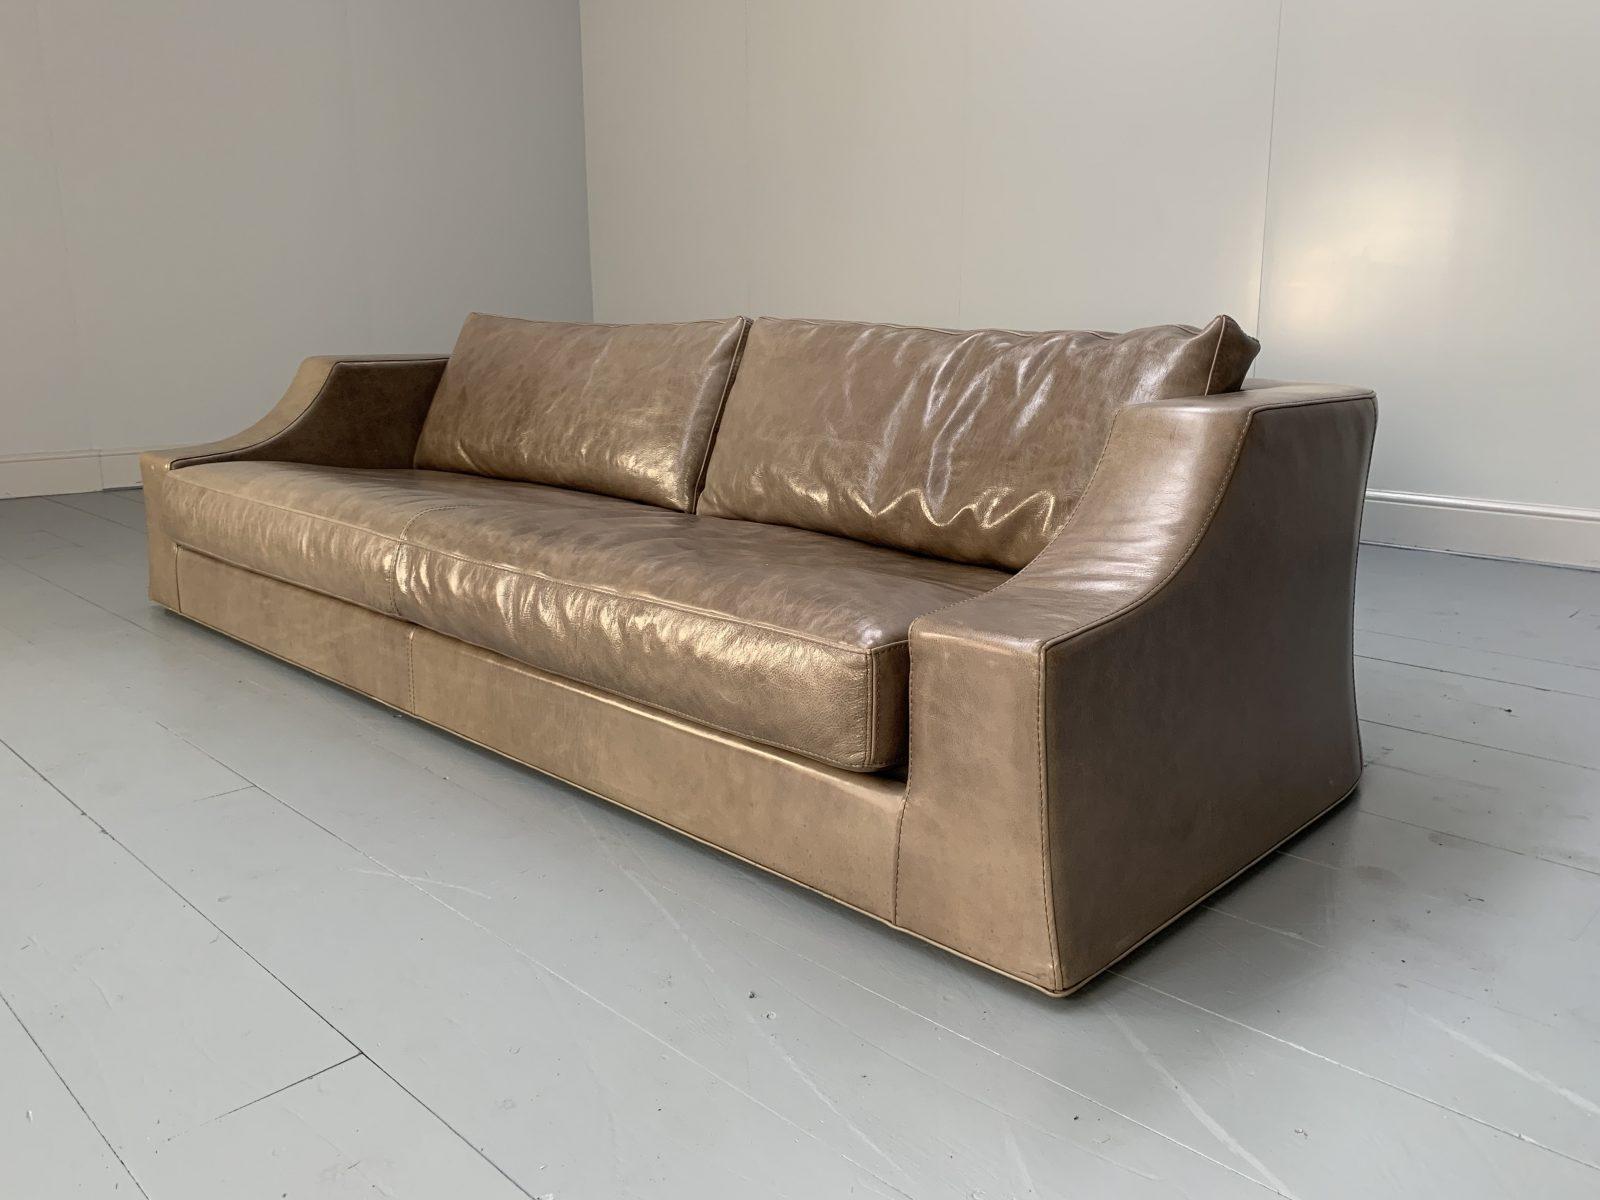 This is a spectacular, rare 4-seat sofa from the world renown Italian furniture house of Baxter, dressed in a sublime cream “Tuscany Cetona” leather.

In a world of temporary pleasures, Baxter create beautiful furniture that remains a joy